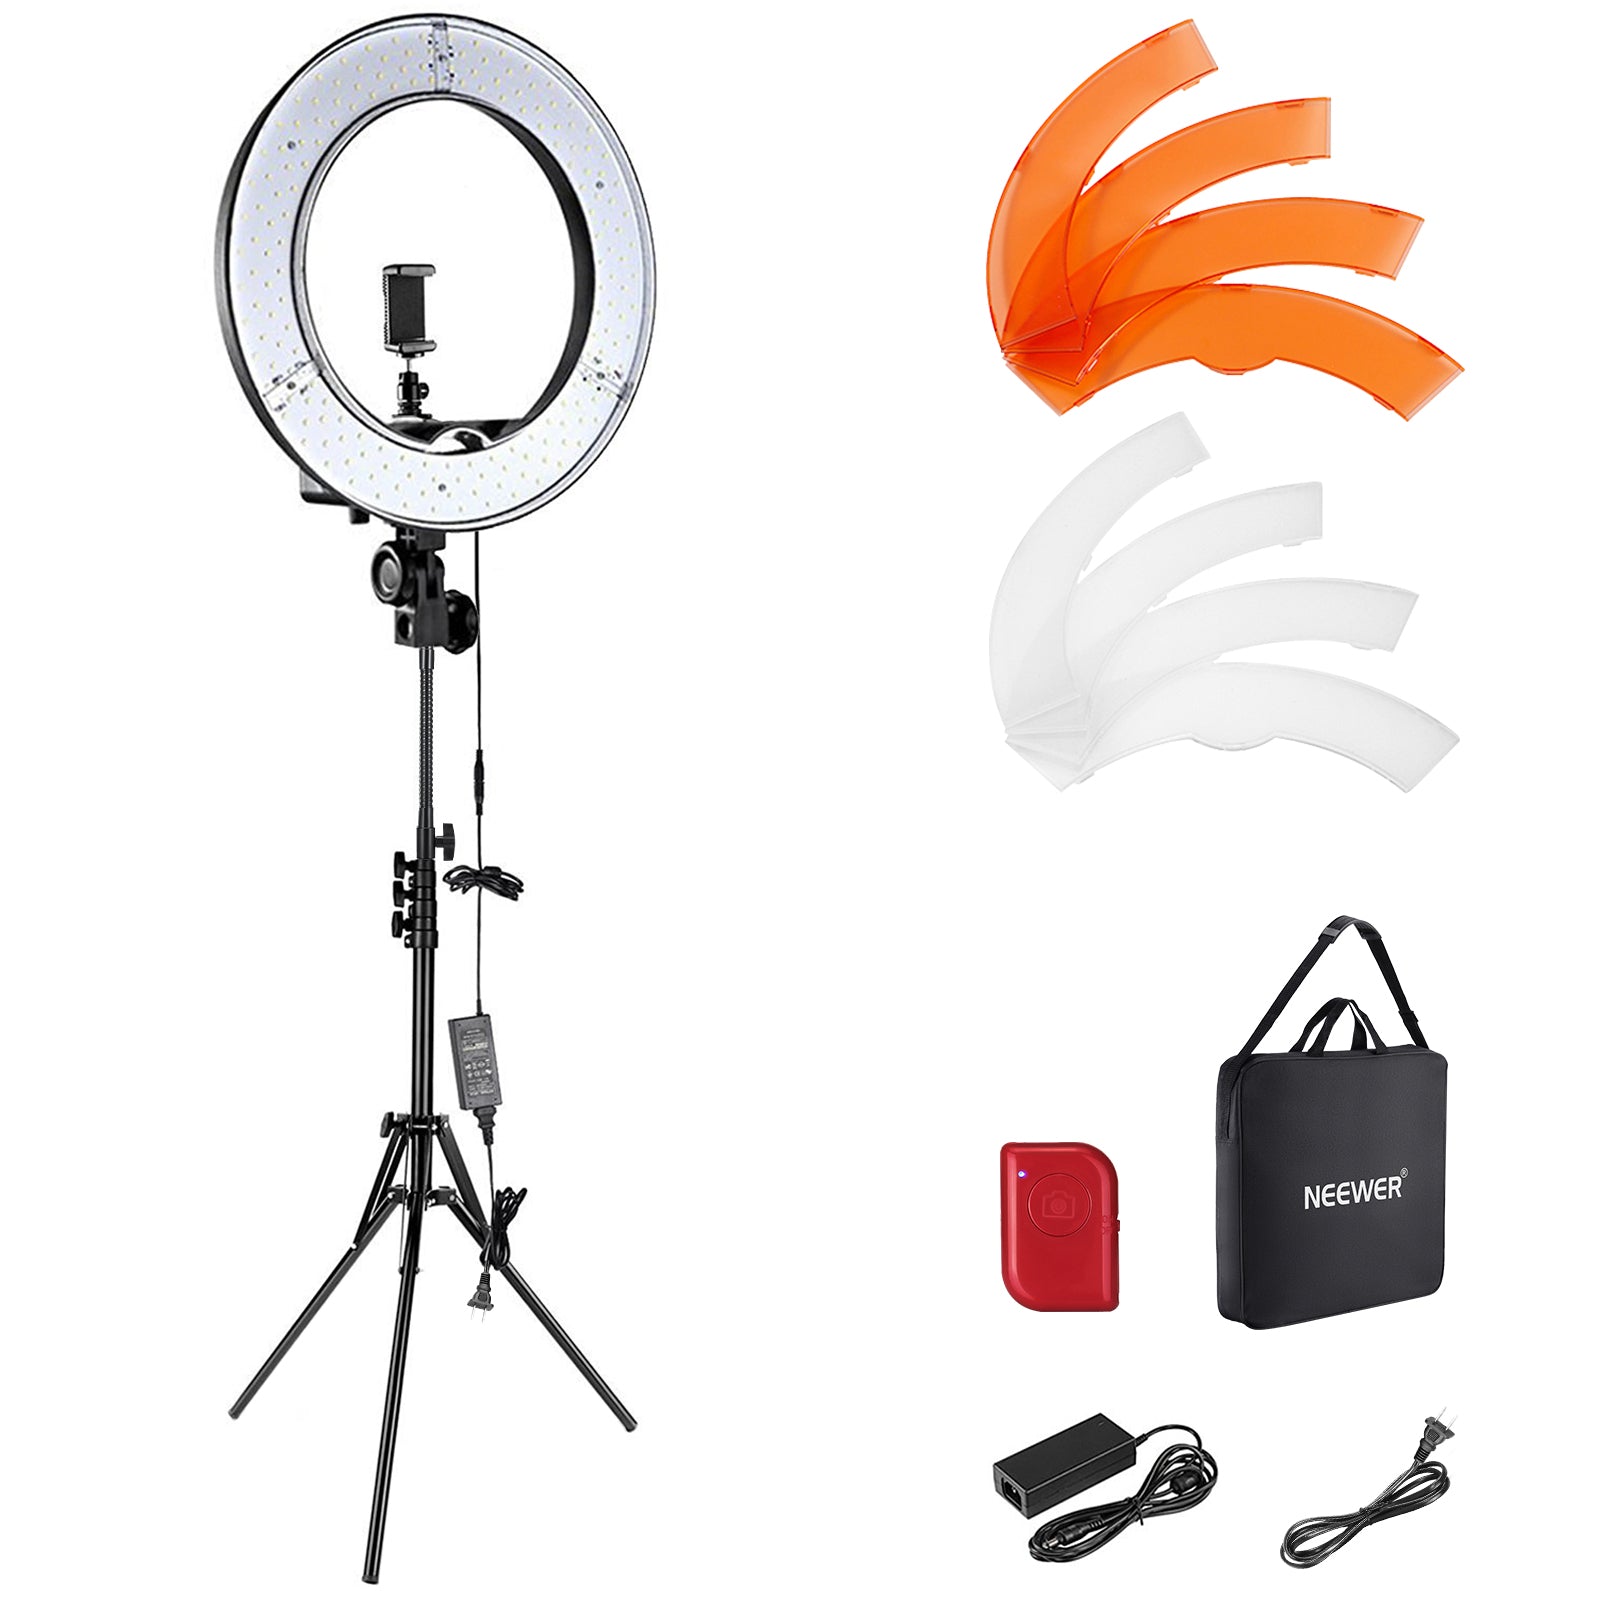 Neewer Ring Light Kit [Upgraded Version-1.8cm Ultra Slim] - 18 inches,  3200-5600K, Dimmable LED Ring Light with light stand